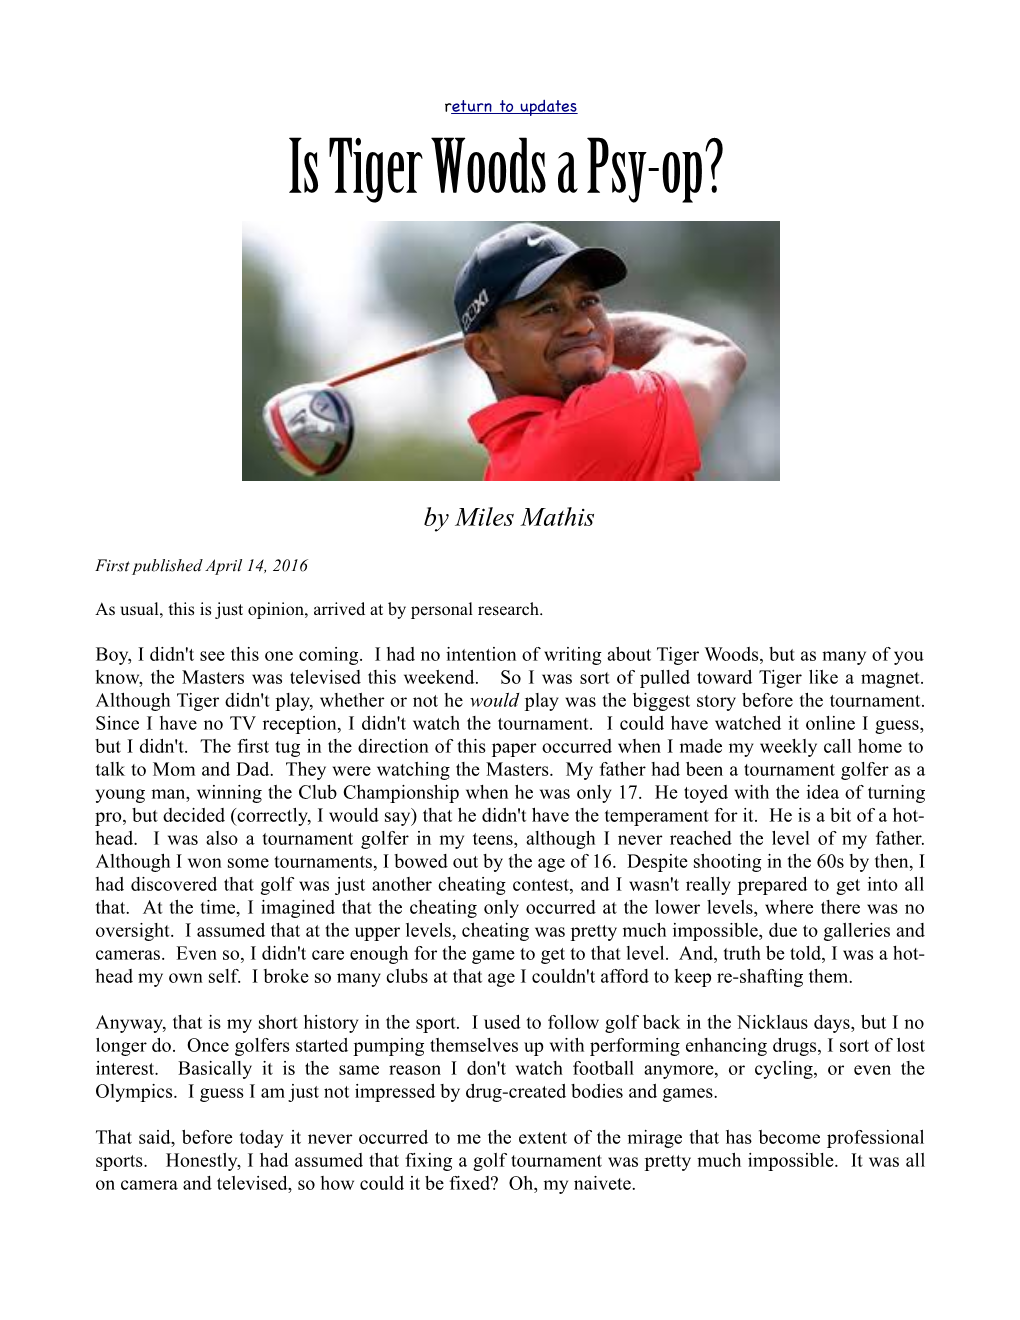 Is Tiger Woods a Psy-Op?